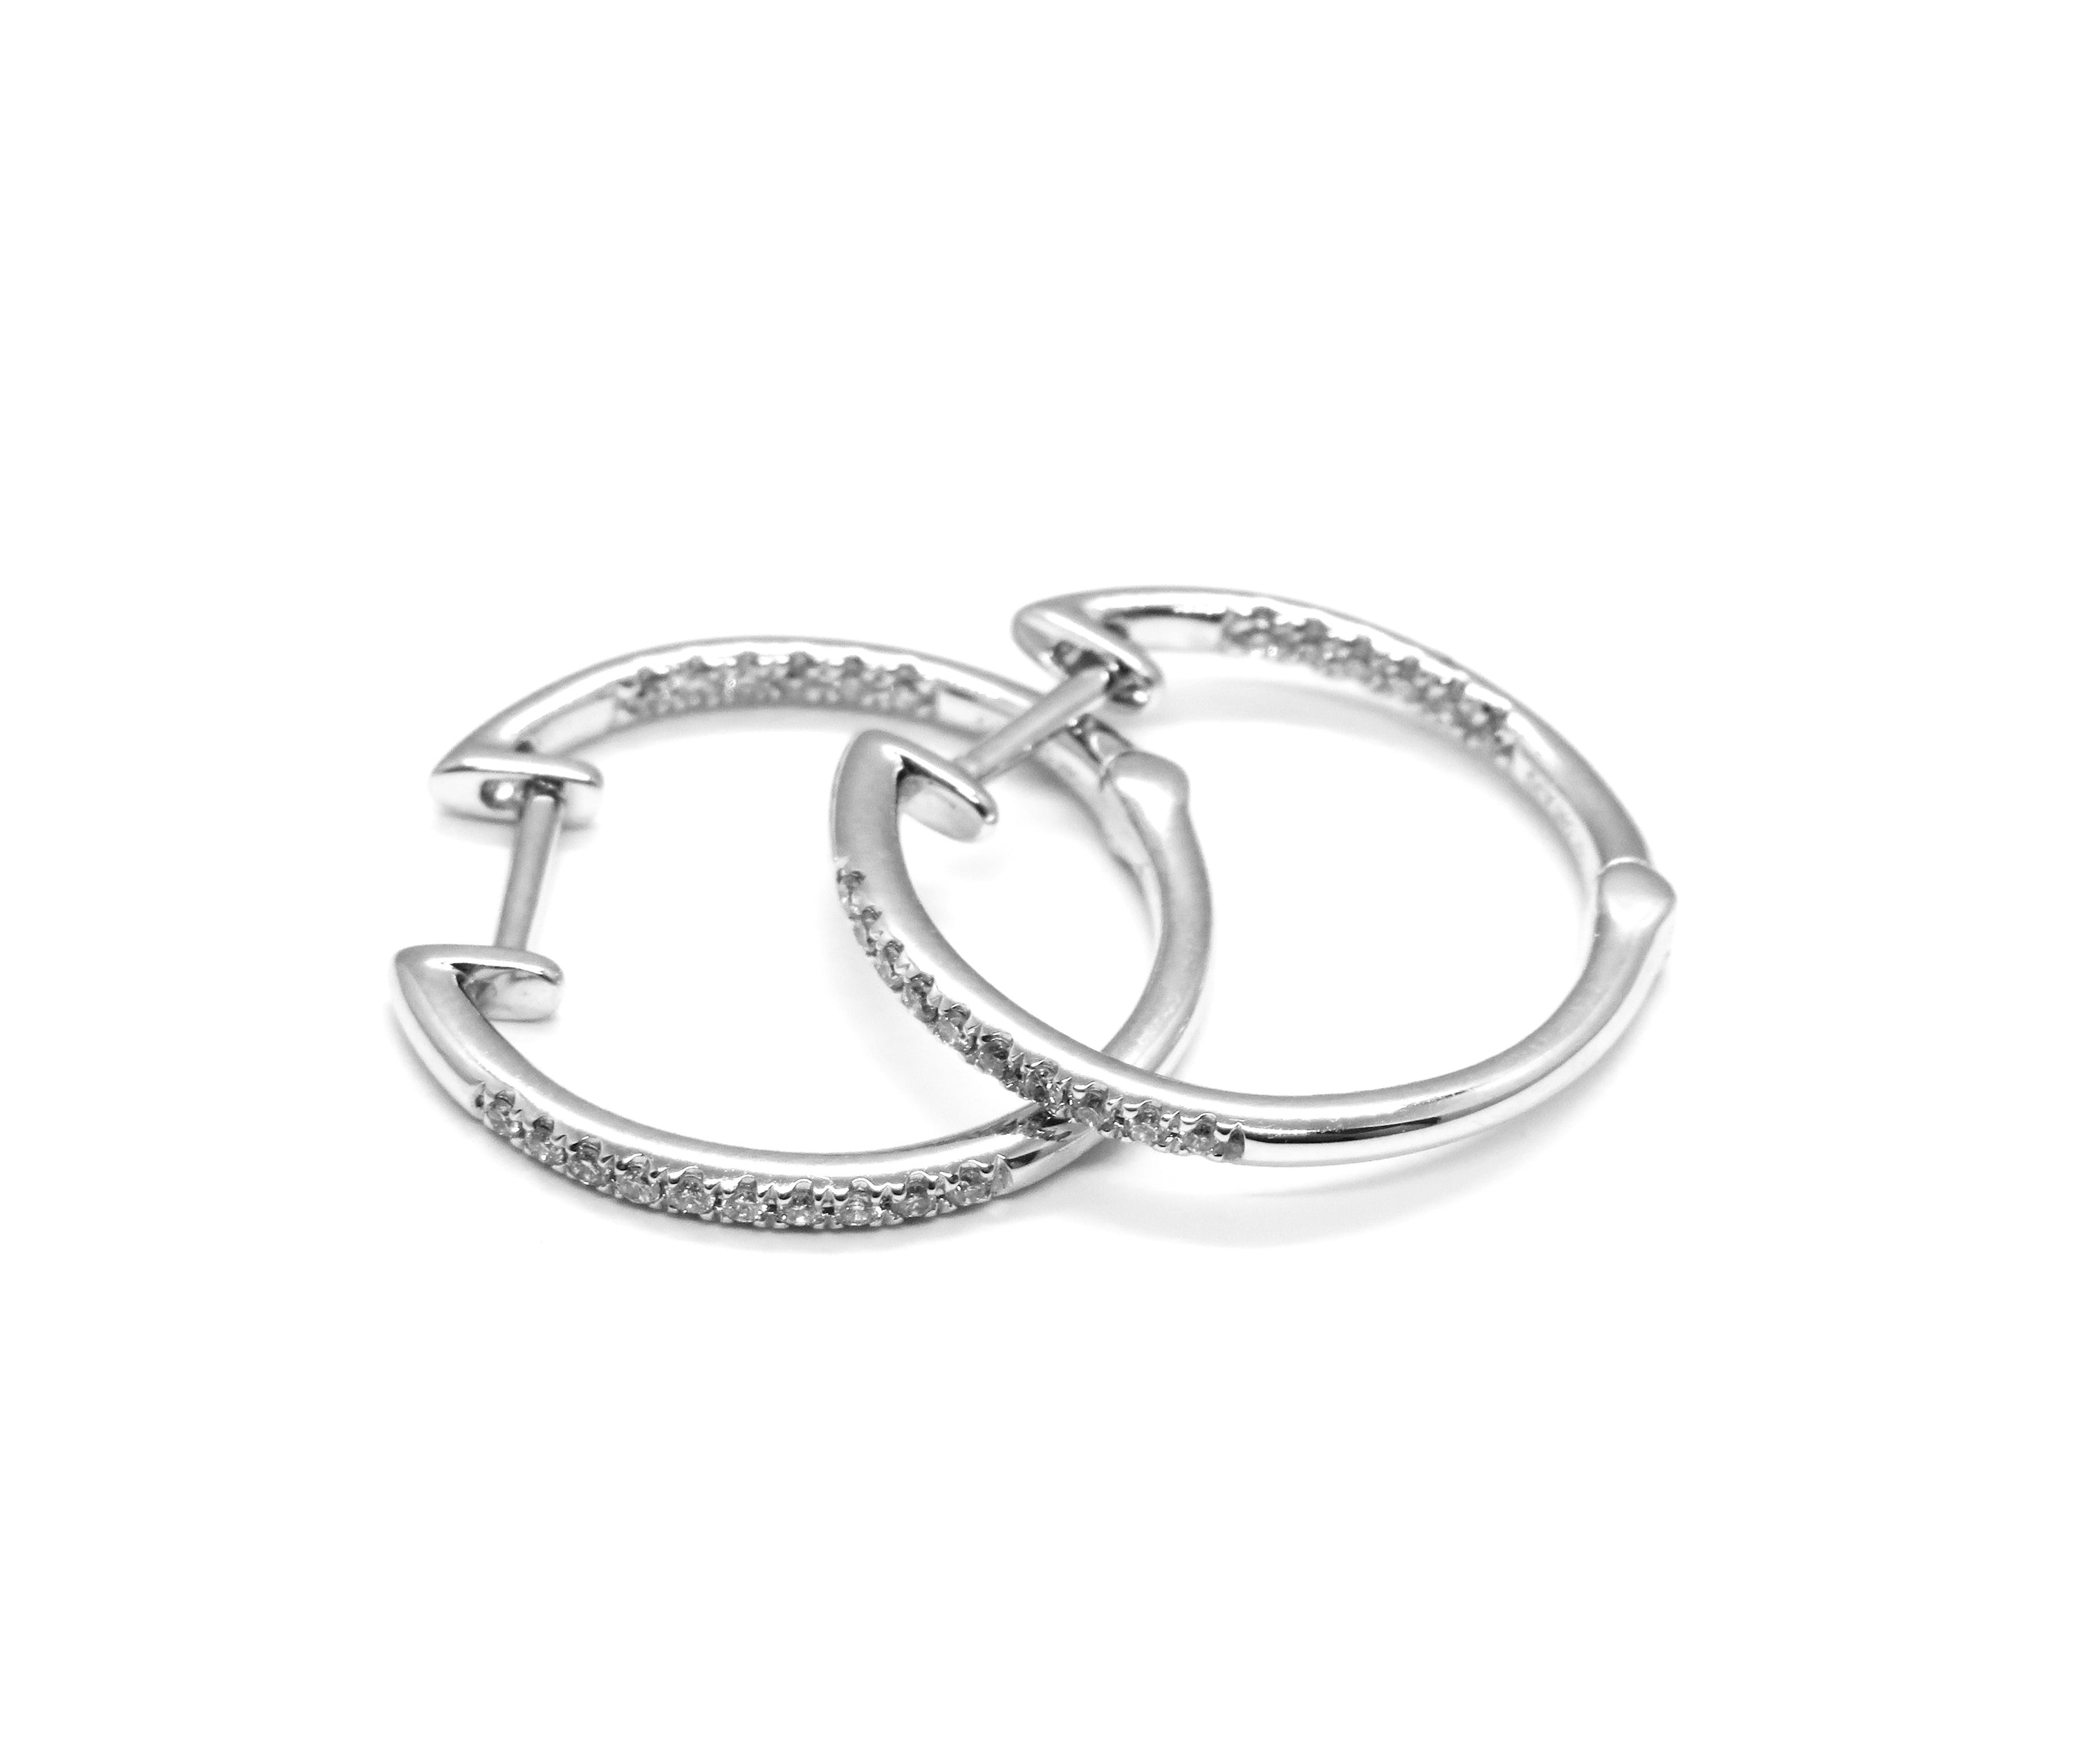 14kt White Gold In and Out Diamond Hoop Earrings